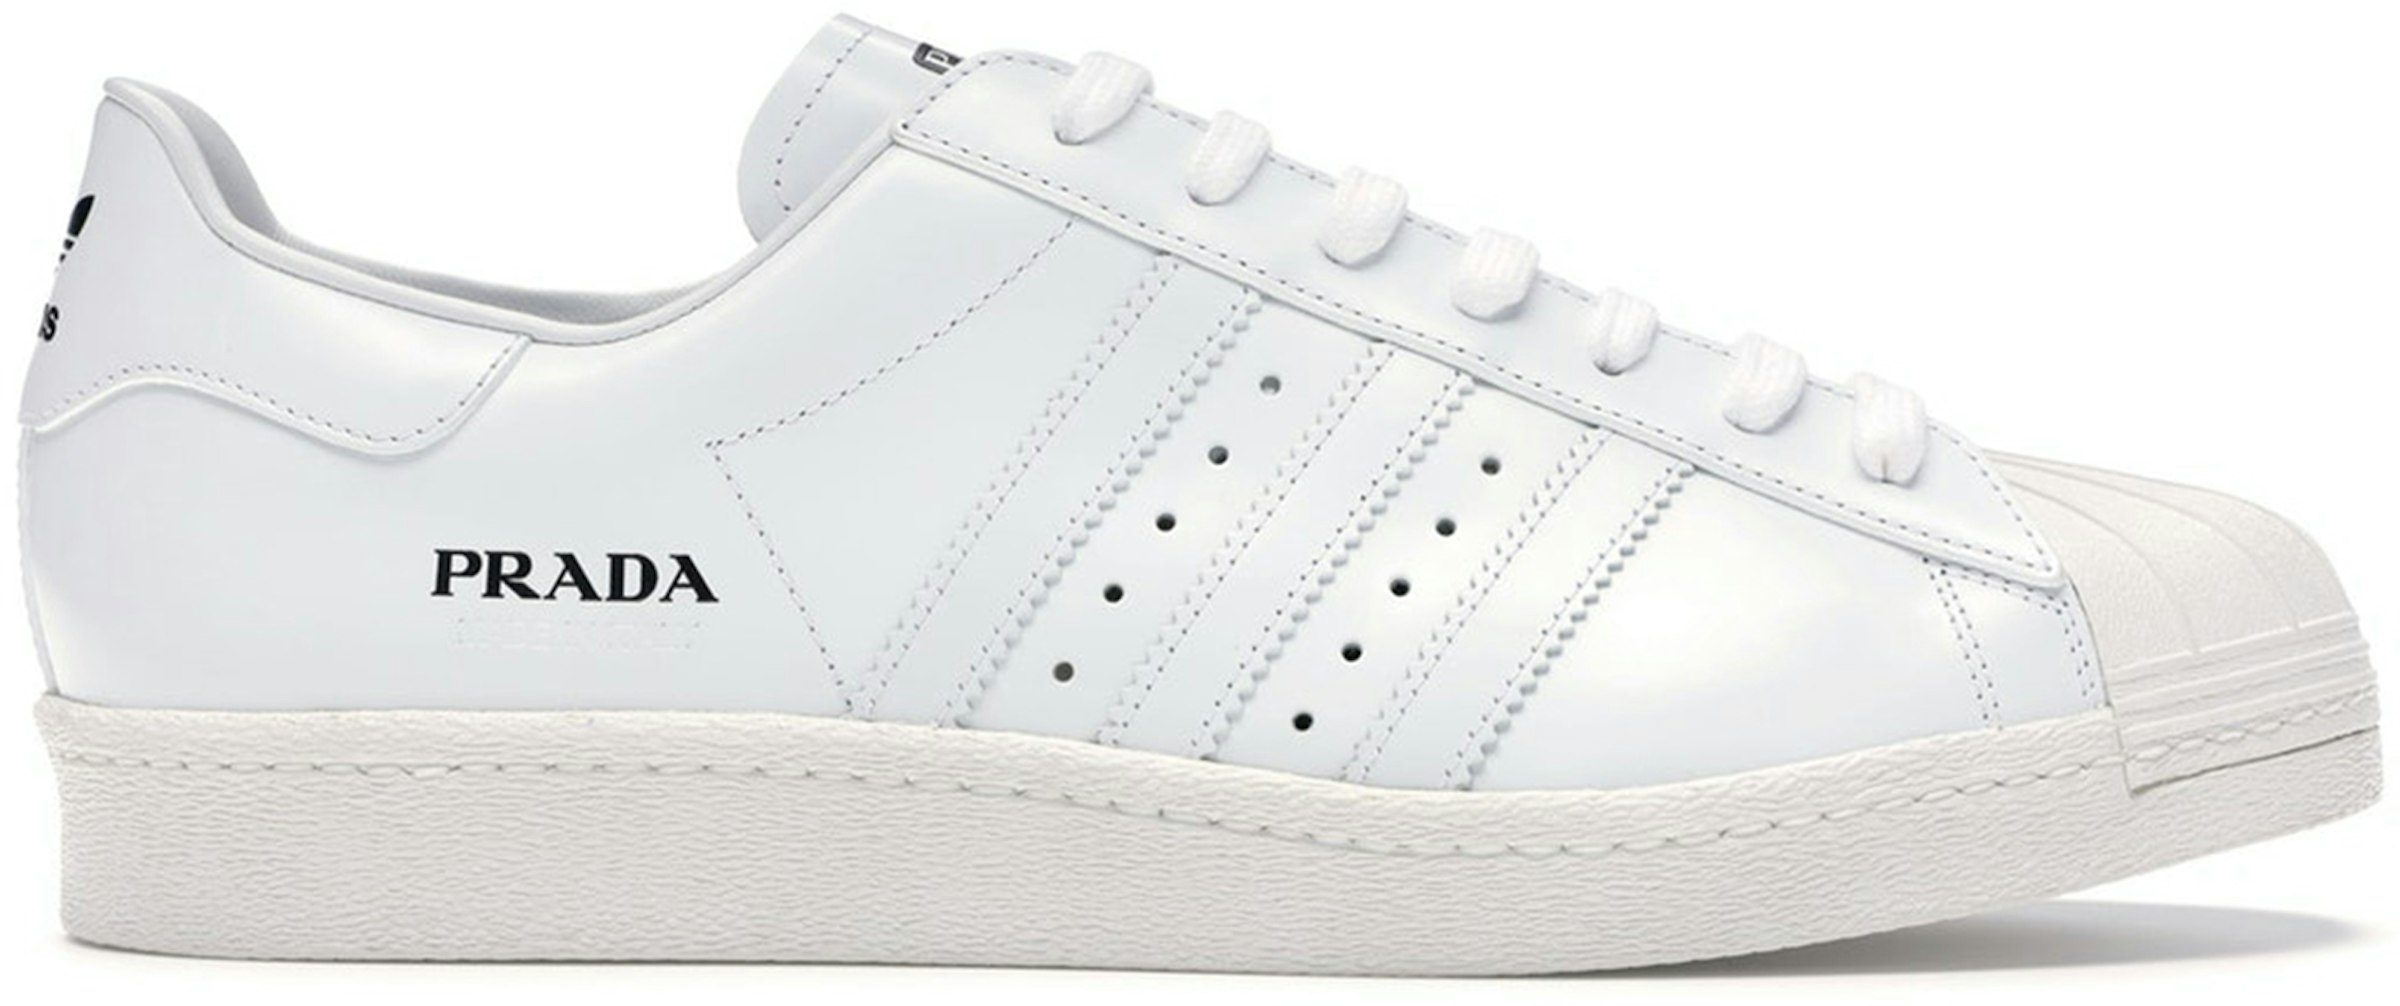 adidas Superstar (Without Bowling Bag) -